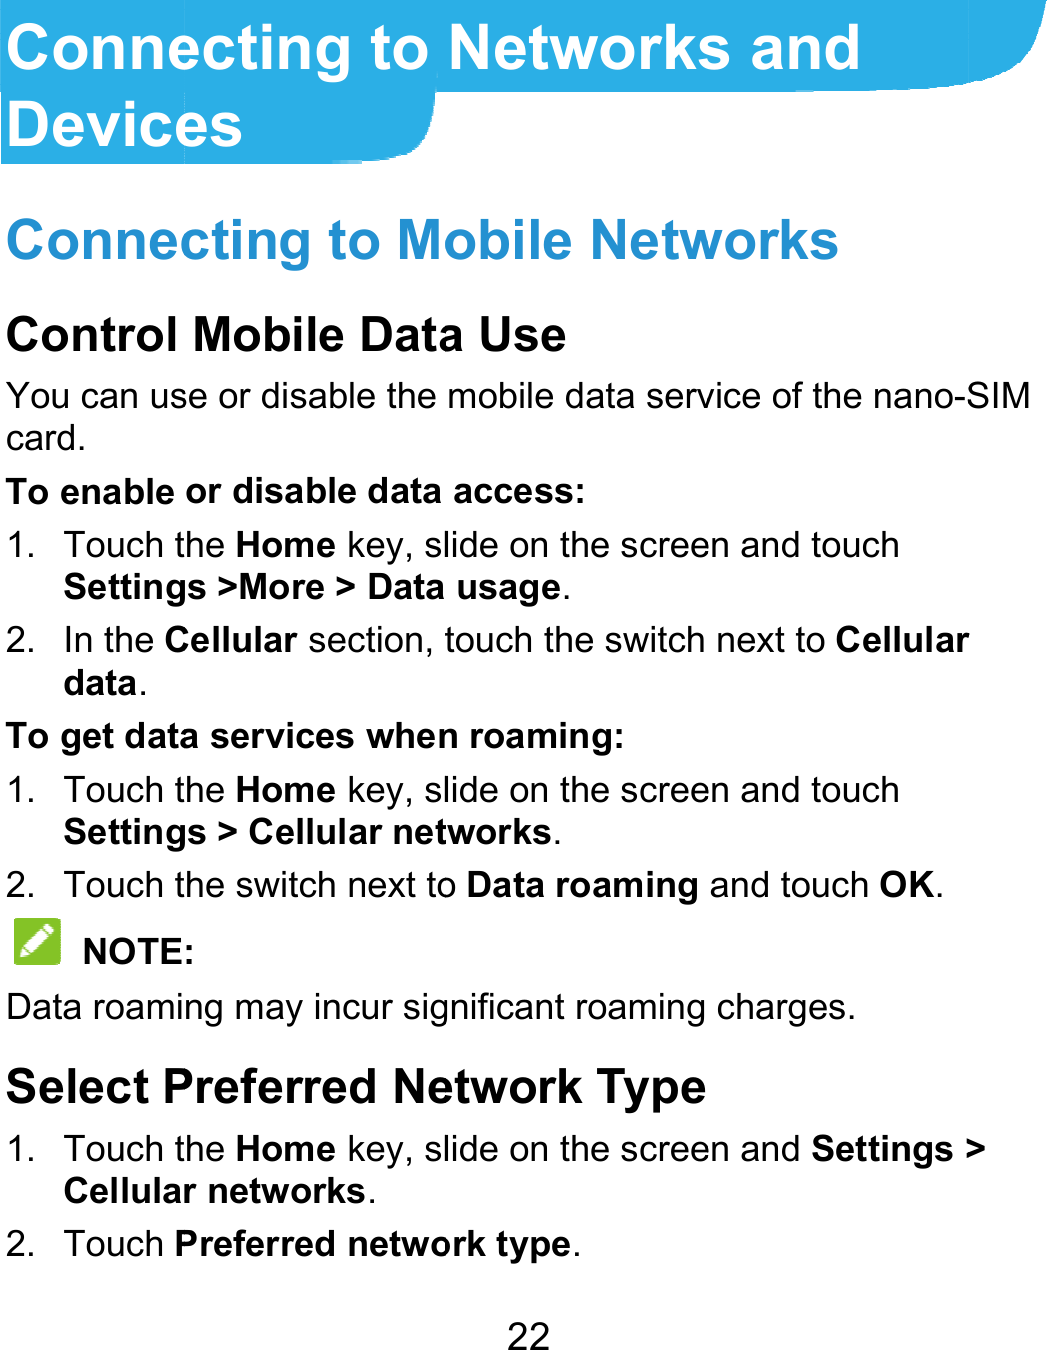  ConneDeviceConnecControl You can uscard. To enable 1. Touch tSetting2. In the Cdata. To get data1. Touch tSetting2. Touch t NOTEData roamiSelect P1. Touch tCellula2. Touch Pecting to es cting to MoMobile Datase or disable the or disable data he Home key, slgs &gt;More &gt; DataCellular section, ta services whenhe Home key, slgs &gt; Cellular nethe switch next to: ng may incur sigPreferred Nehe Home key, slr networks. Preferred netwo22 Networksobile Netwa Use mobile data servaccess: lide on the scree usage. touch the switch n roaming: lide on the screetworks. o Data roaming gnificant roaming etwork Typelide on the screeork type. s and works vice of the nano-Sen and touch next to Cellularen and touch and touch OK. charges.  en and Settings &gt;SIM r &gt; 